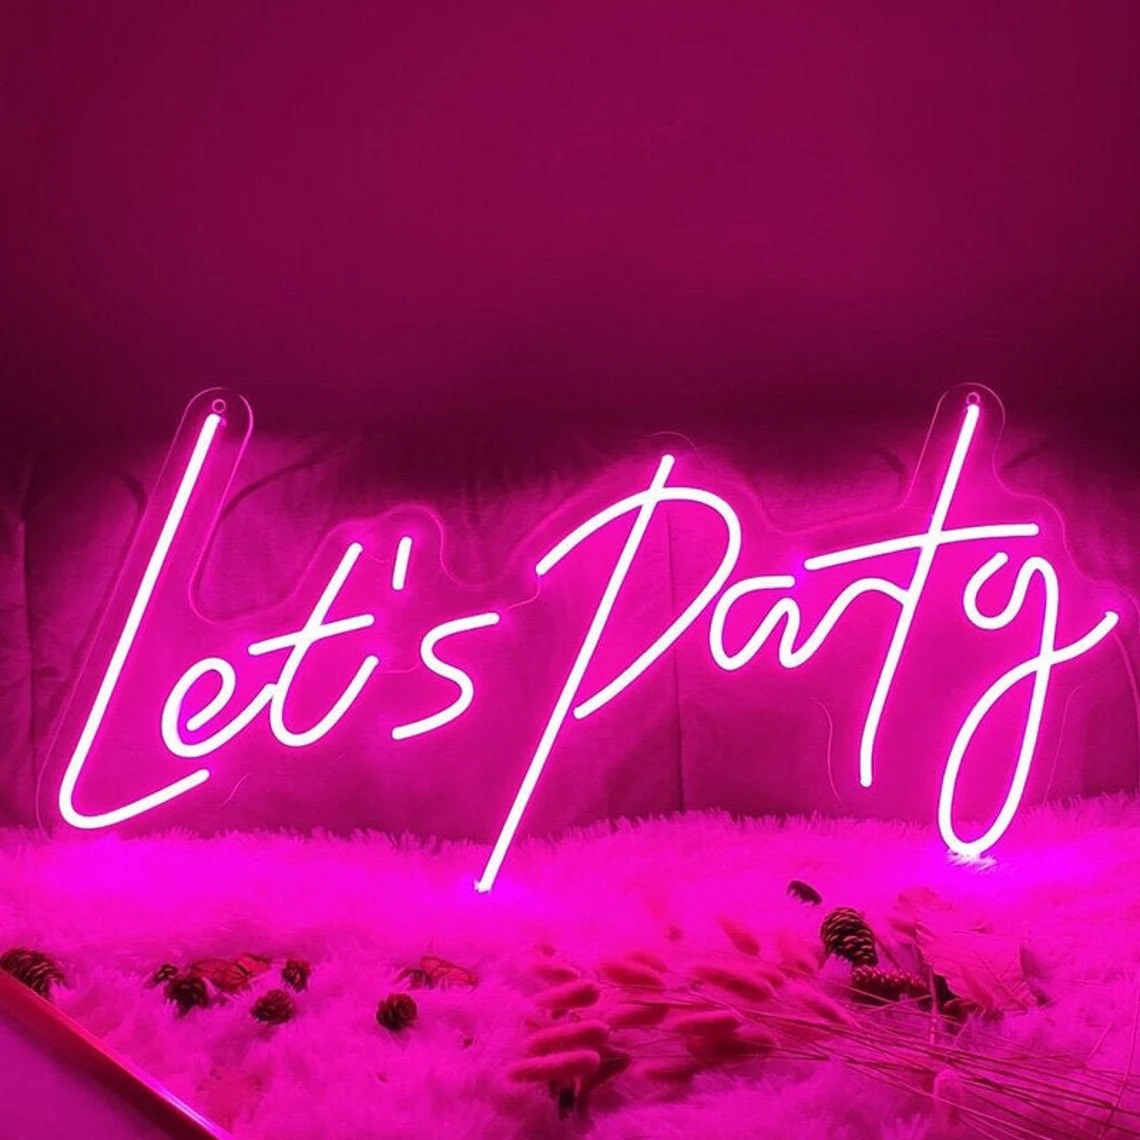 Custom RGB Neon Sign Color Changing Neon Sign Led Neon Light Custom Neon Wall Art Let's Party Neon Sign Bedroom Neon Sign Wedding Neon 